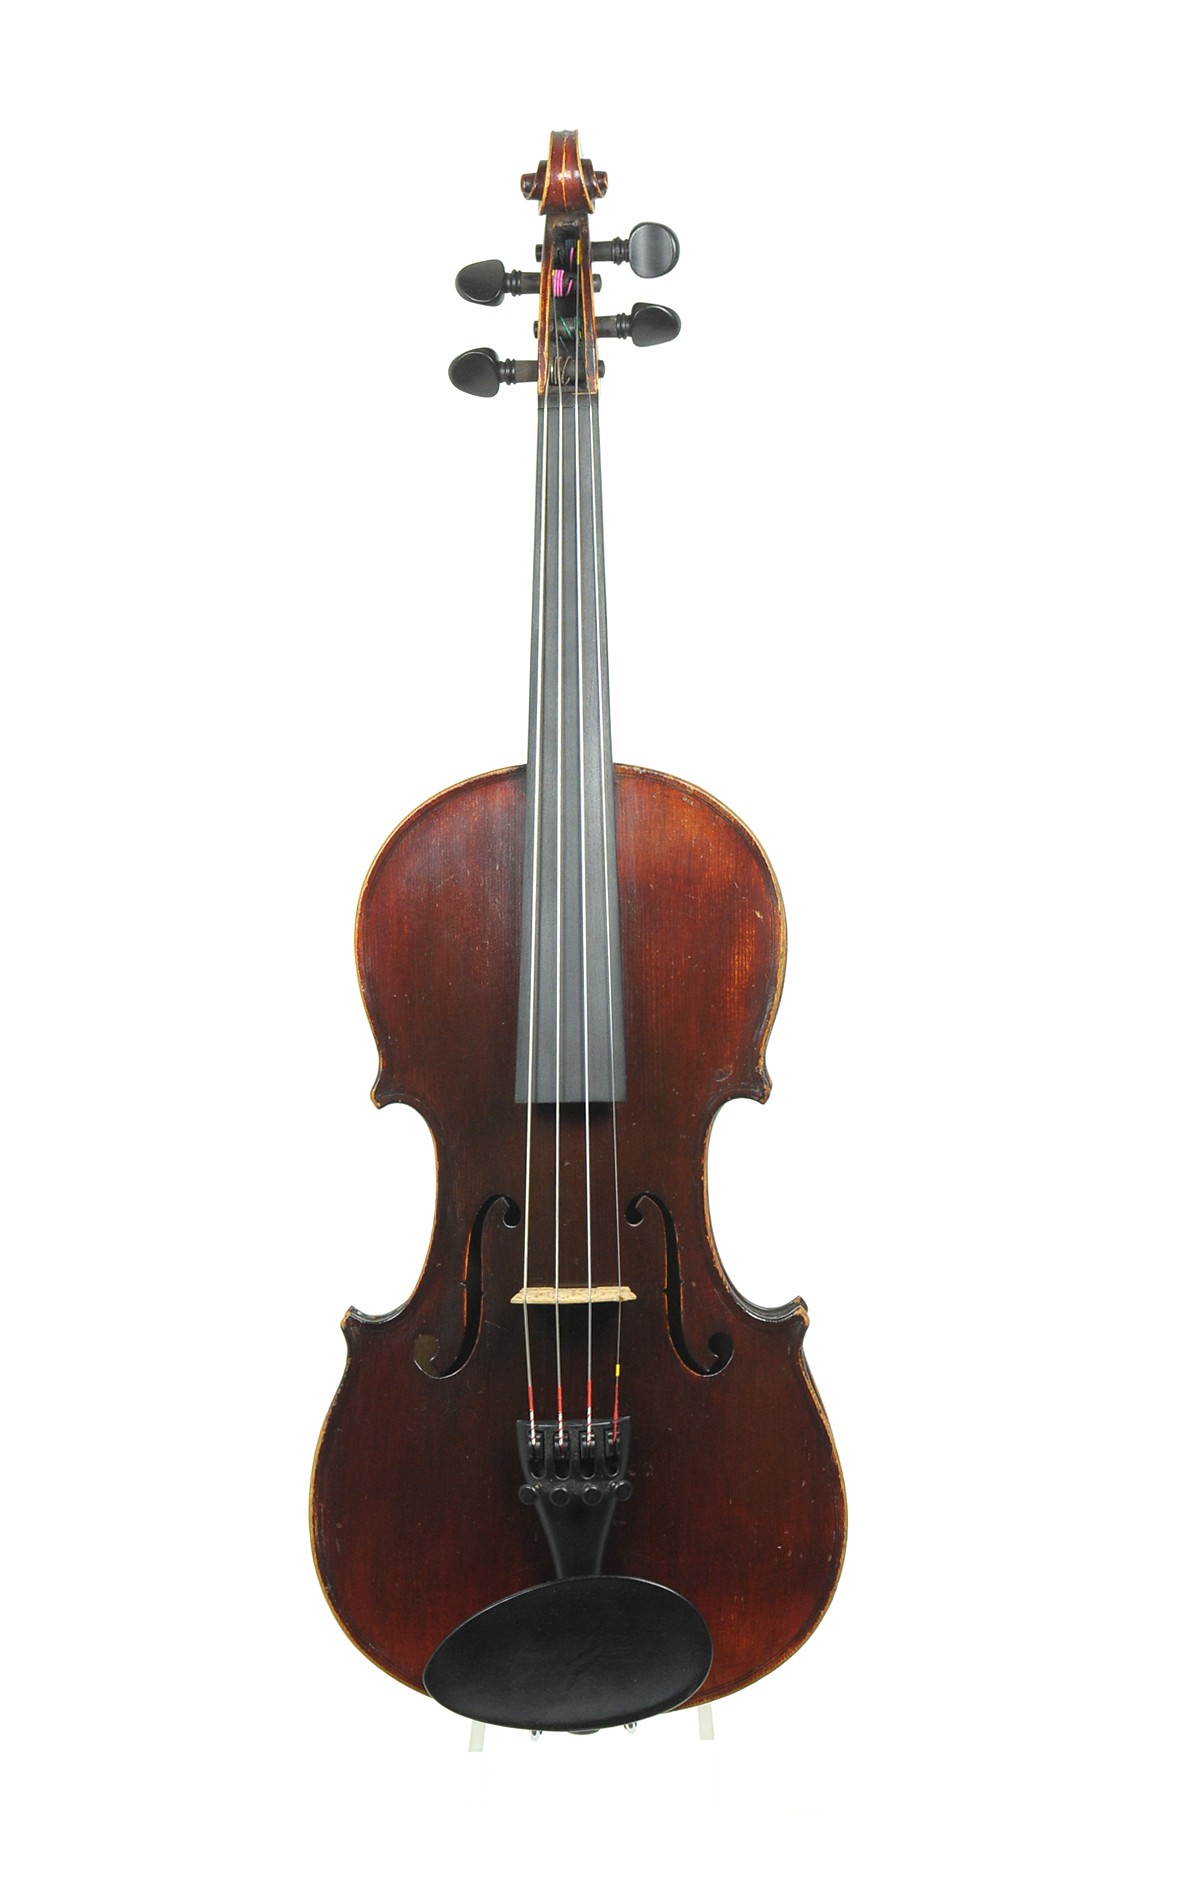 Mittenwald 1/2 sized violin, approx. 1900 - top